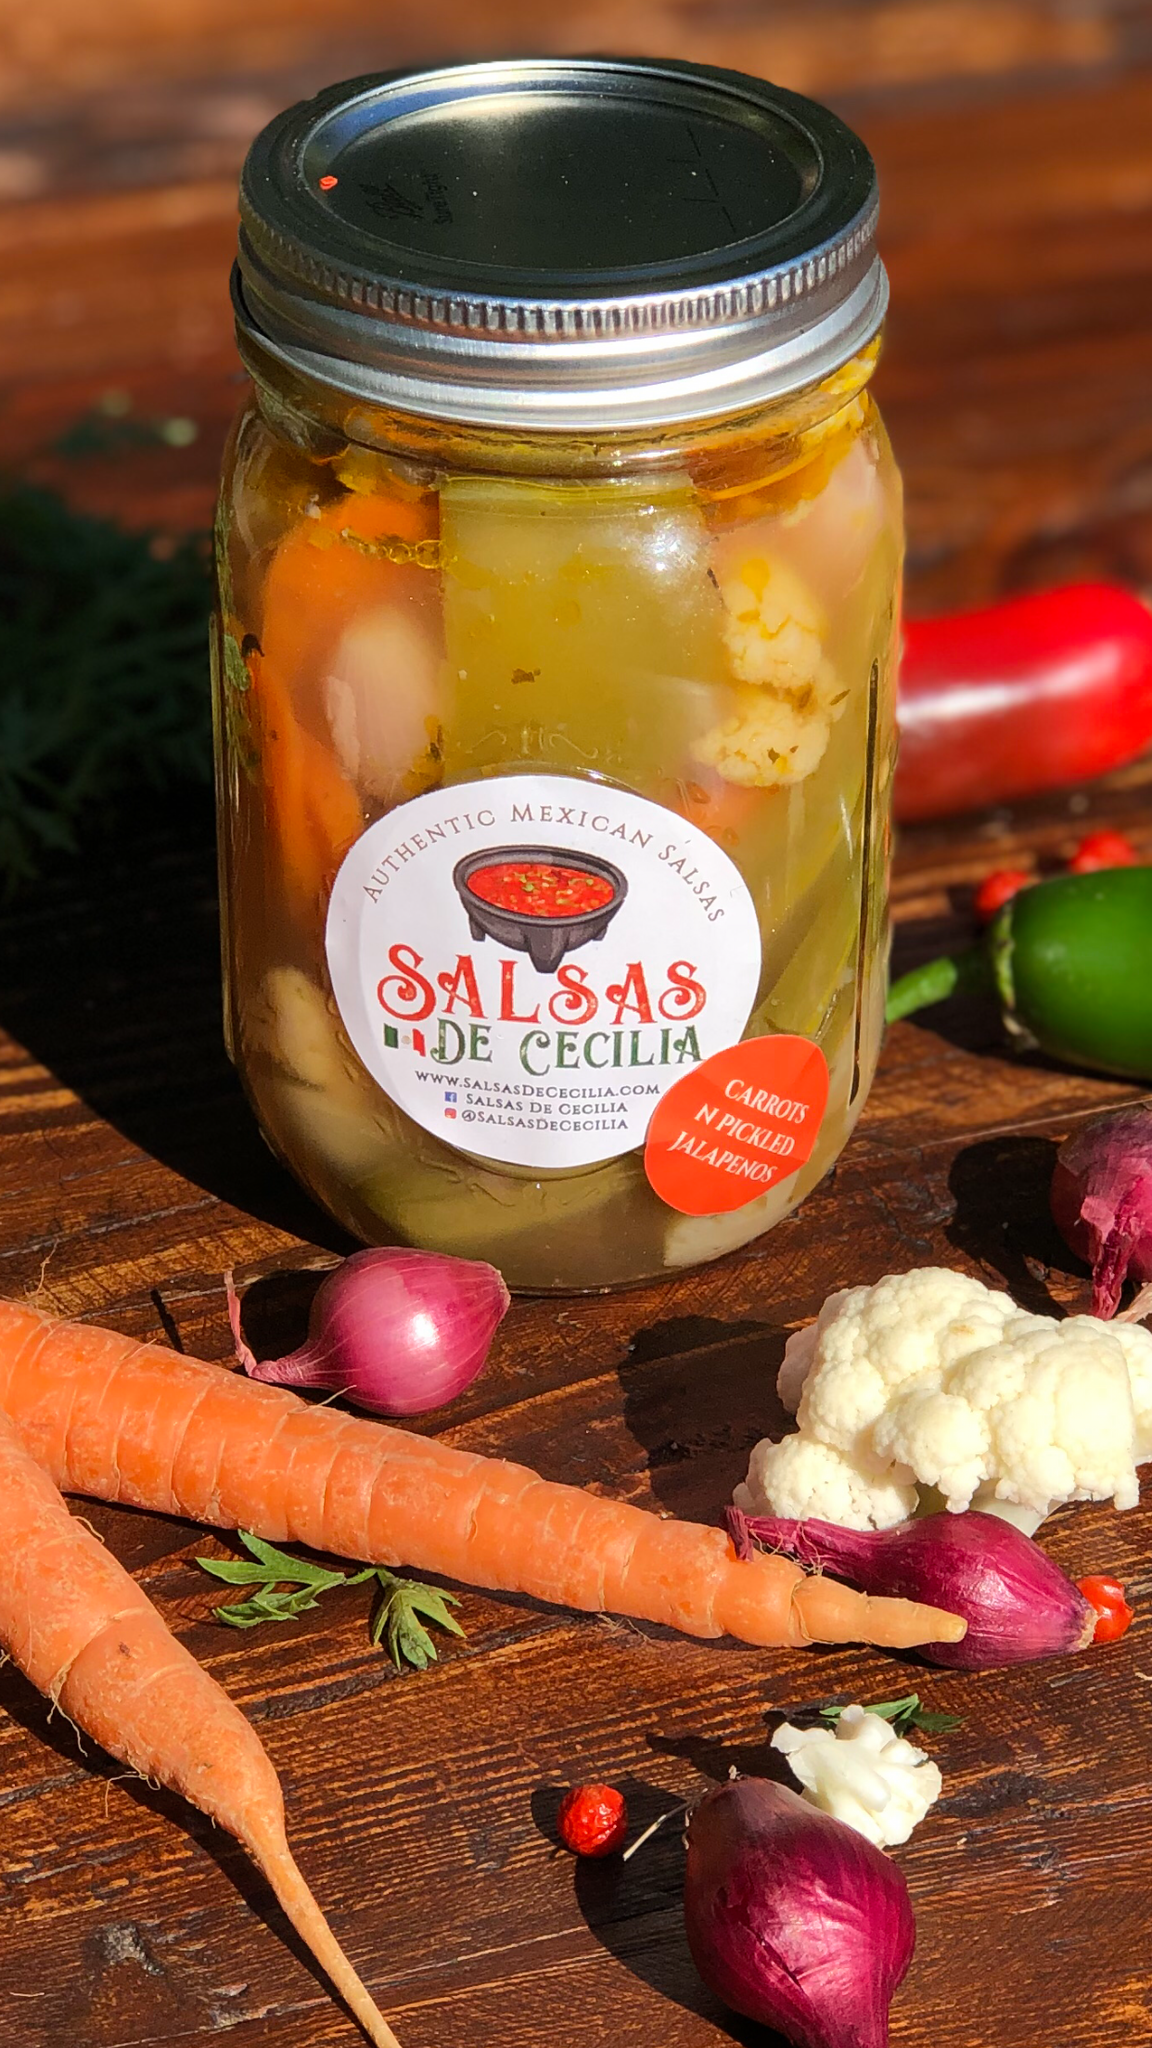 Carrots and pickled Jalapenos